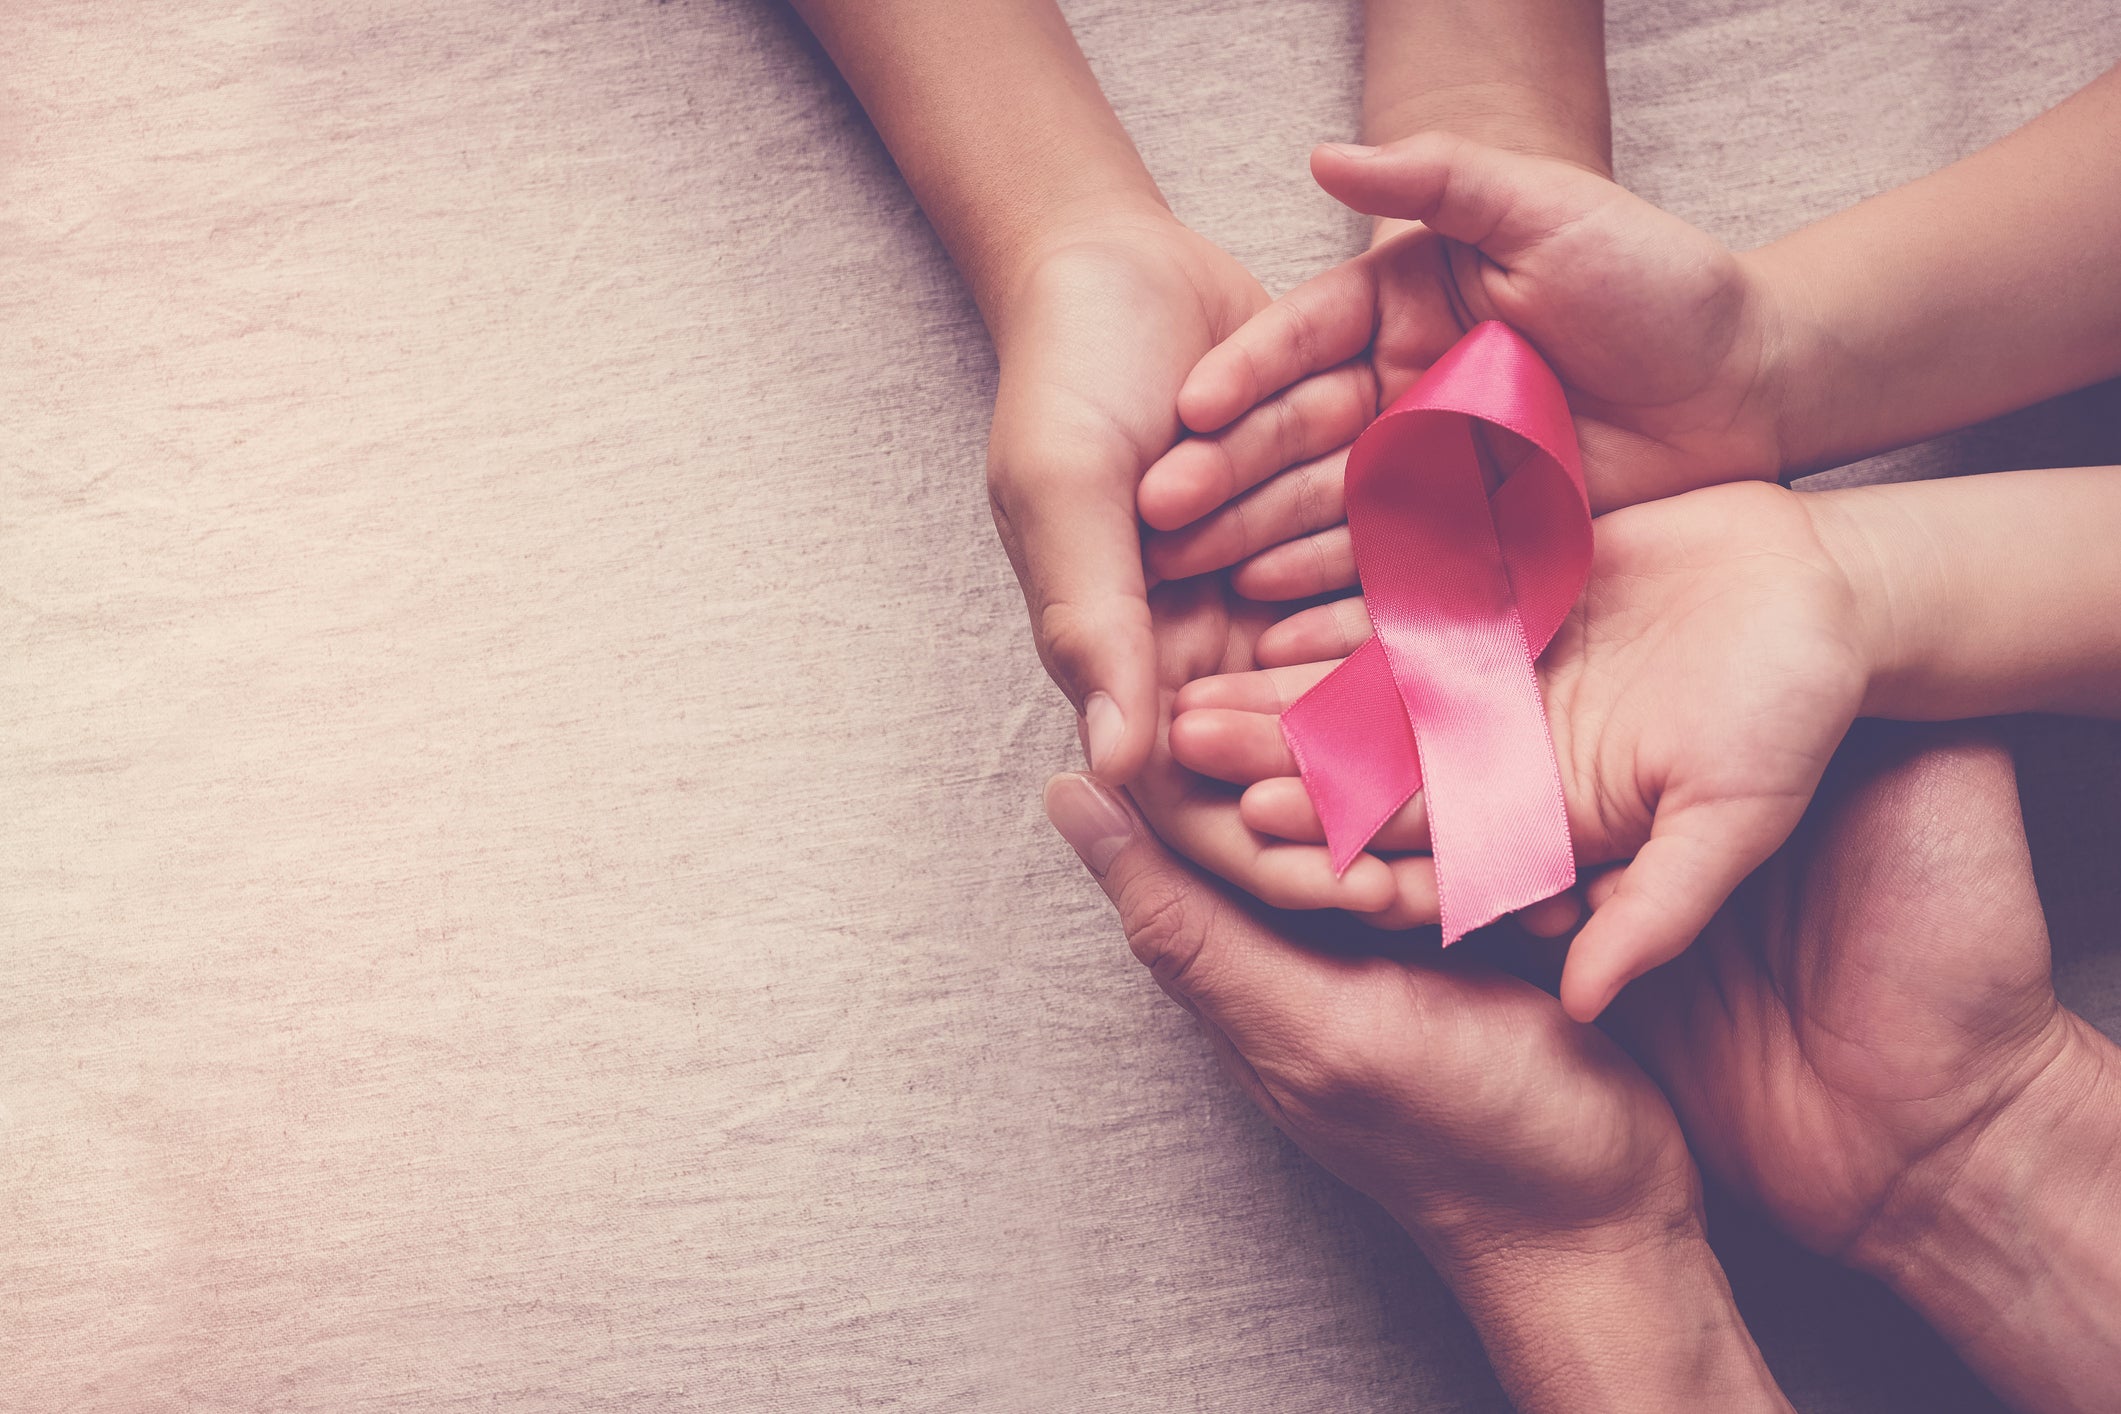 Family hands holding pink ribbon, breast cancer awareness, October pink concept